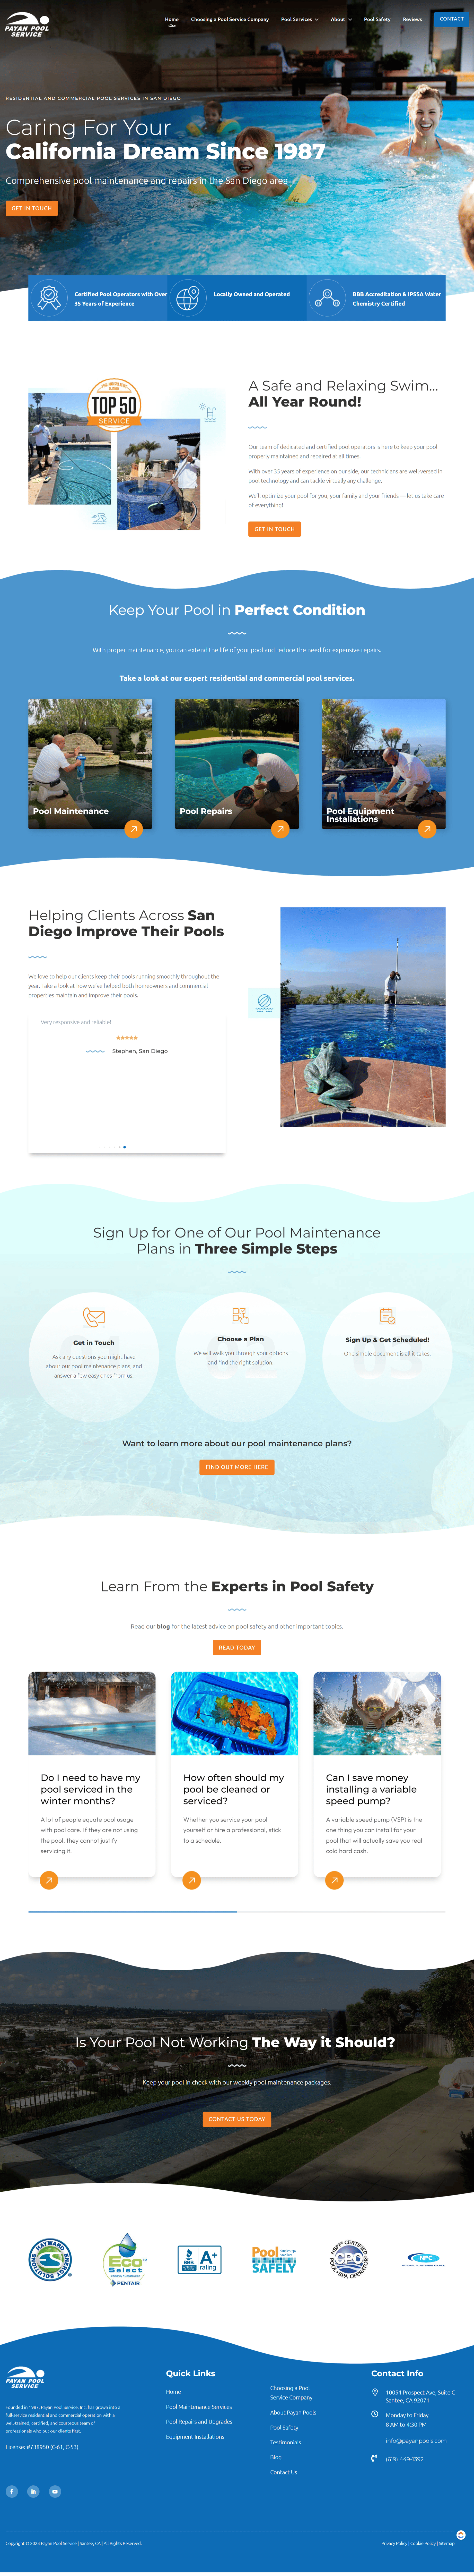 Payan Pool Service new website design home page layout.